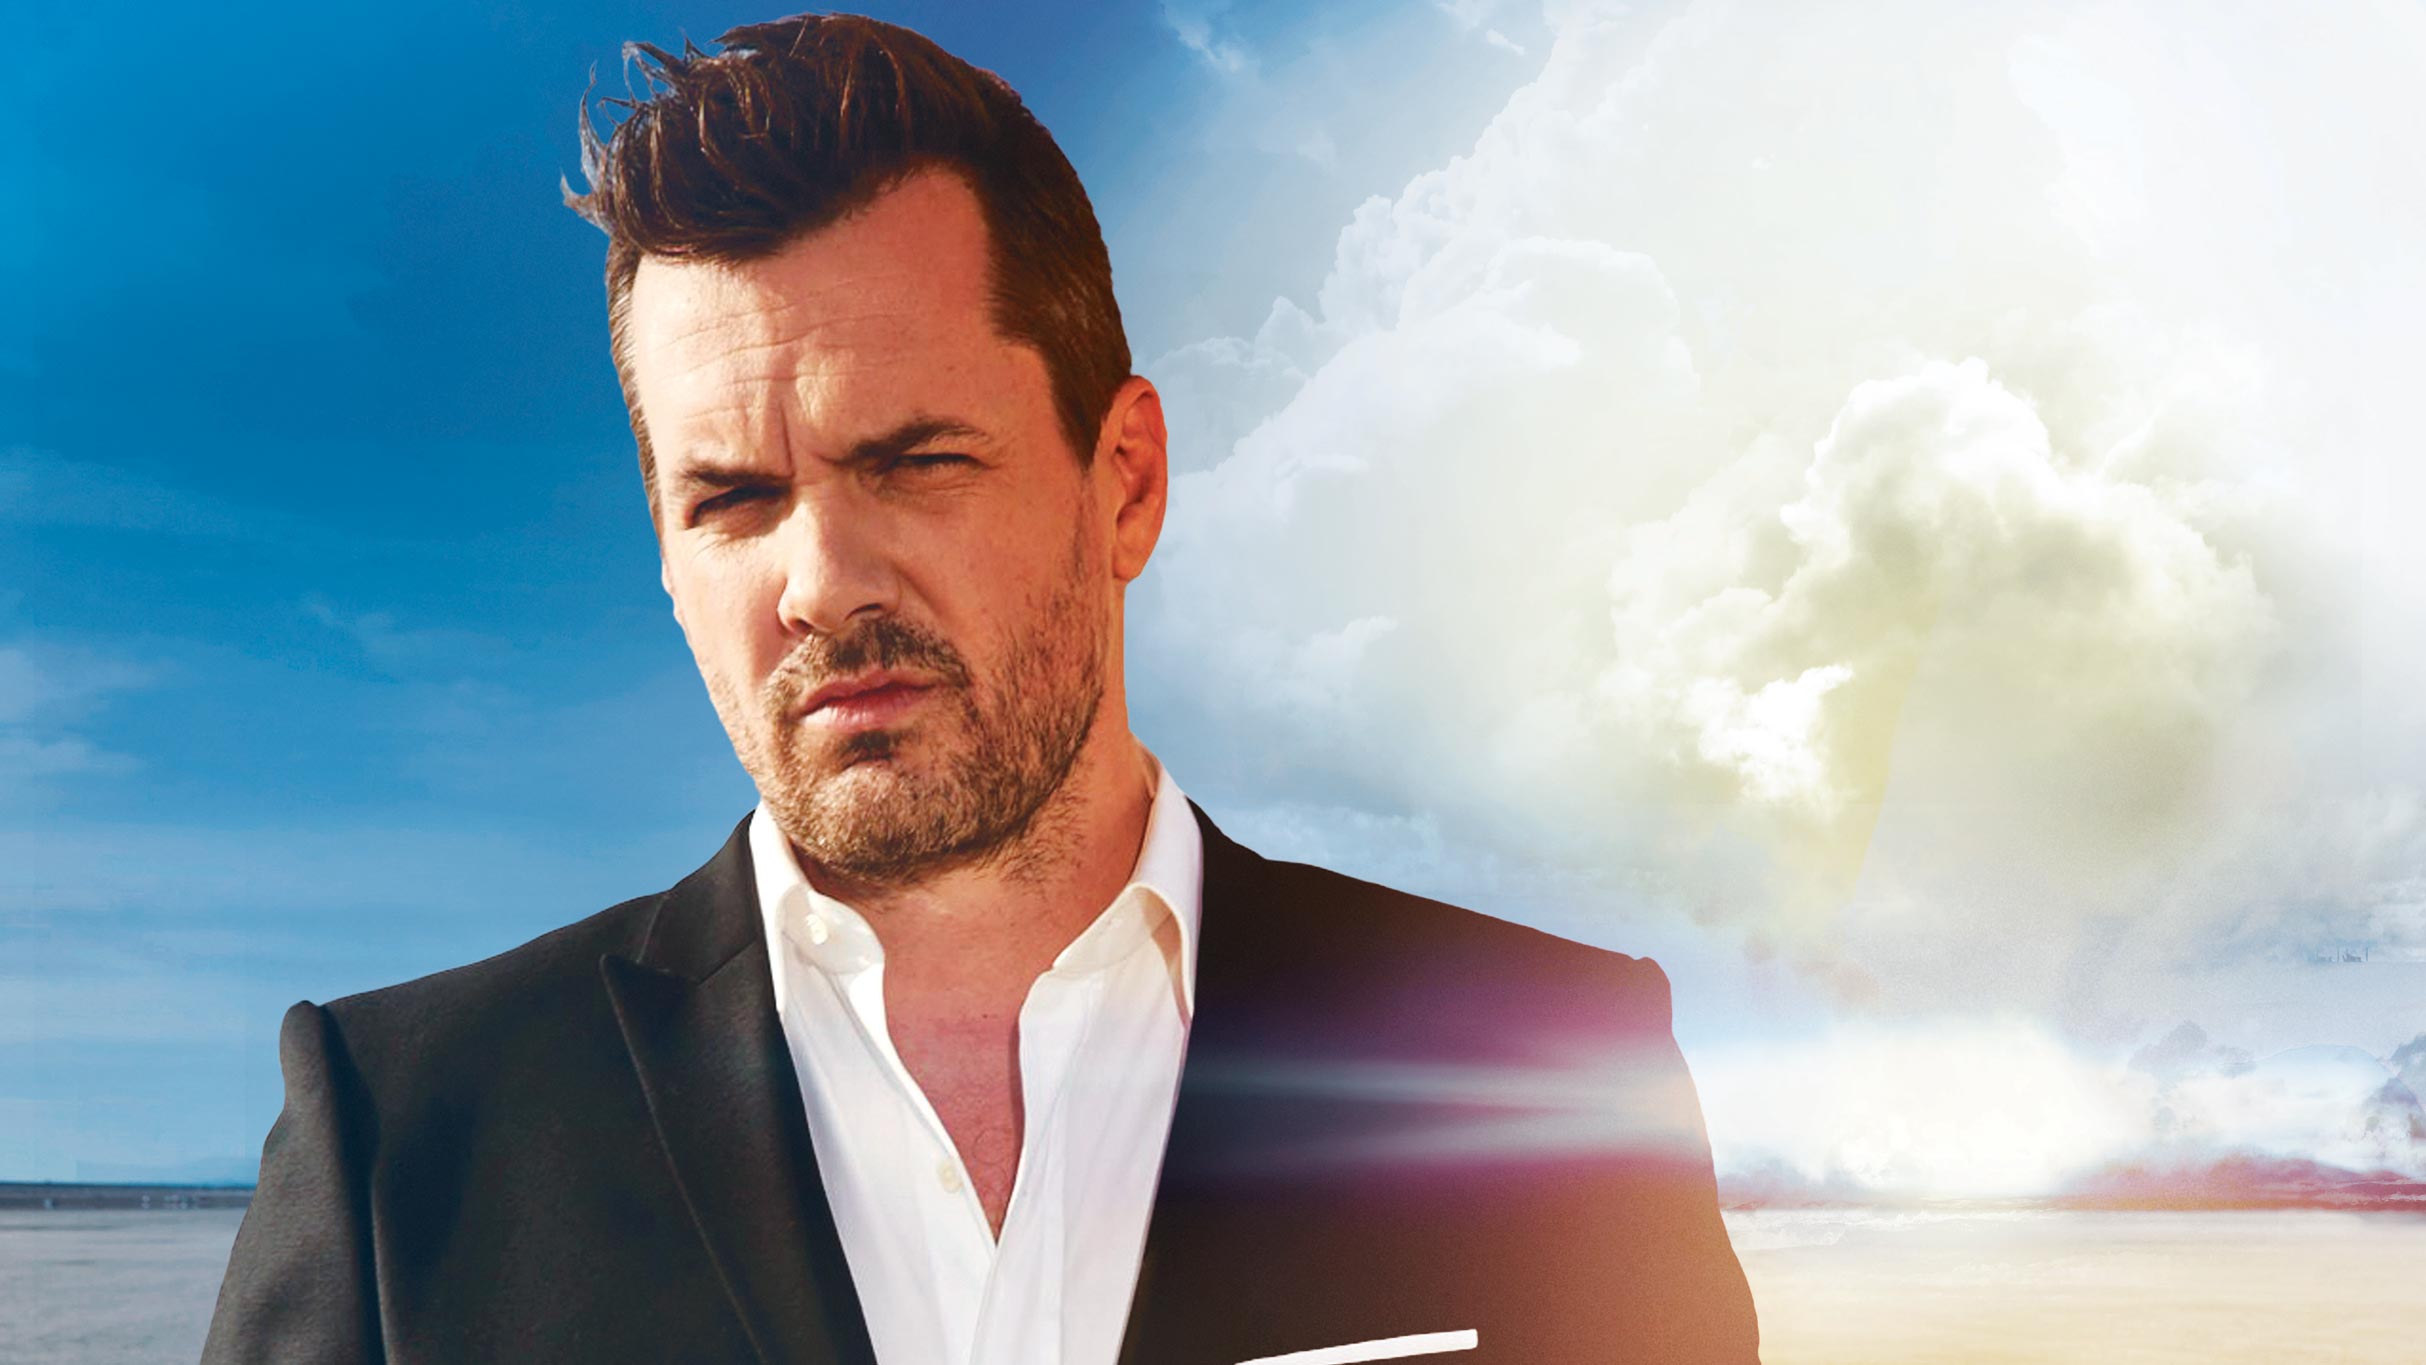 The Charm Offensive with Jim Jefferies and Jimmy Carr pre-sale code